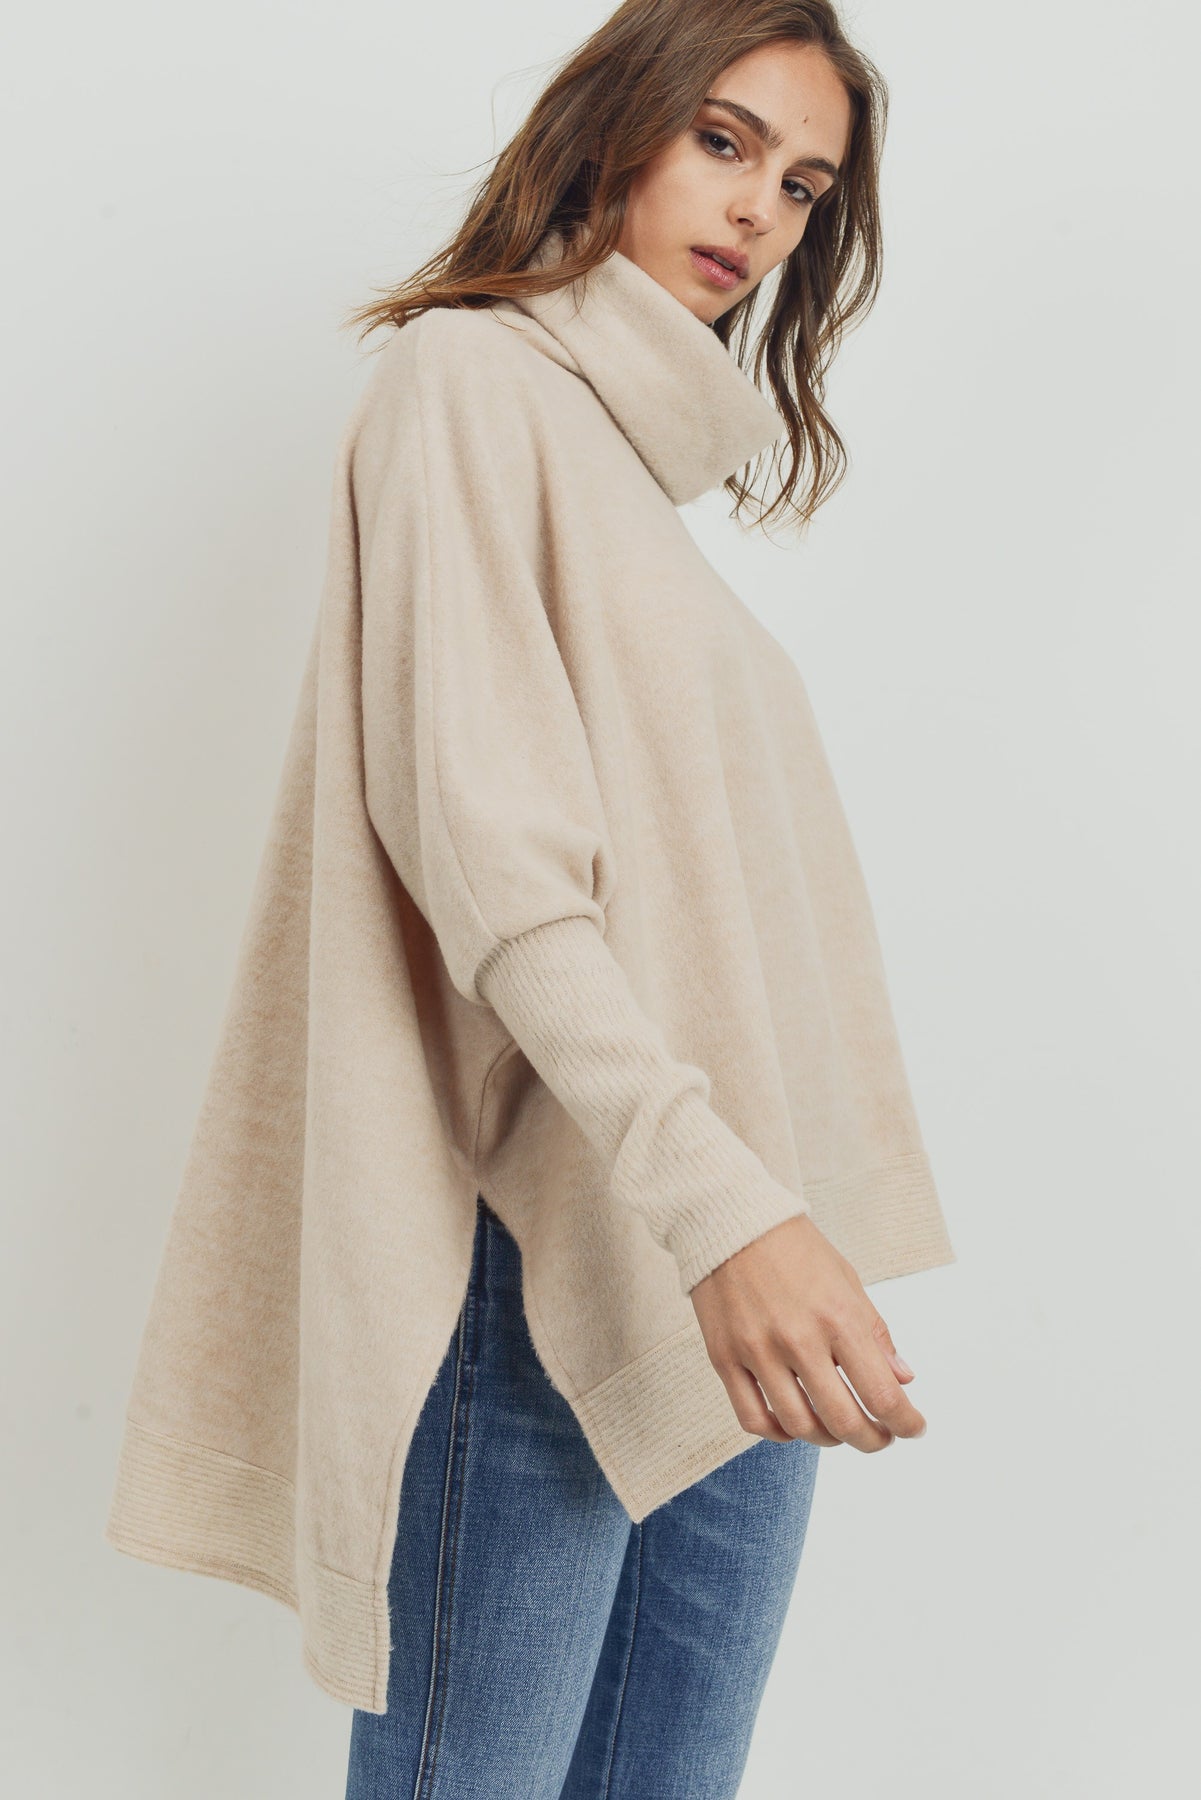 Brushed Knit Cowl Turtle Neck High Low Top